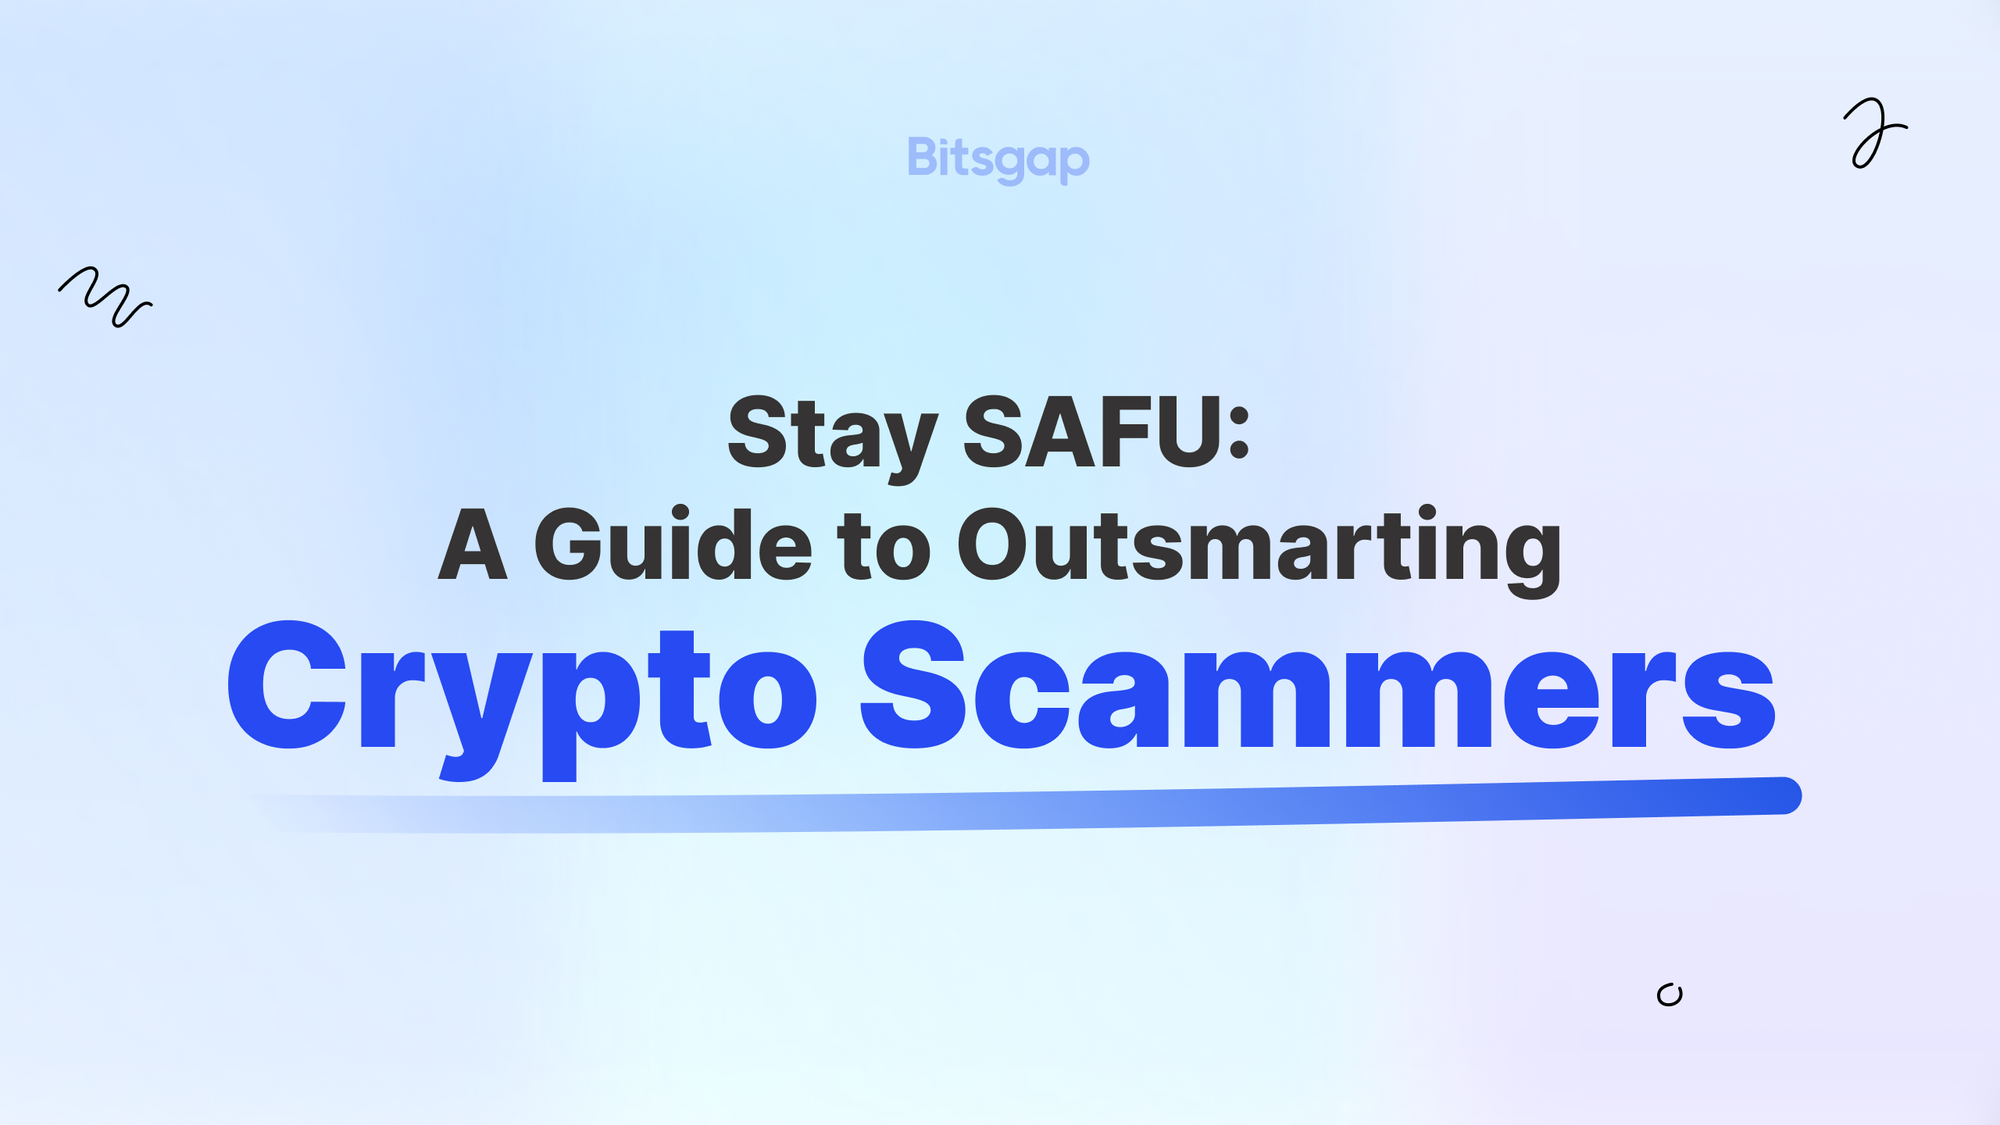 Types of Crypto Scams and How to Avoid Them